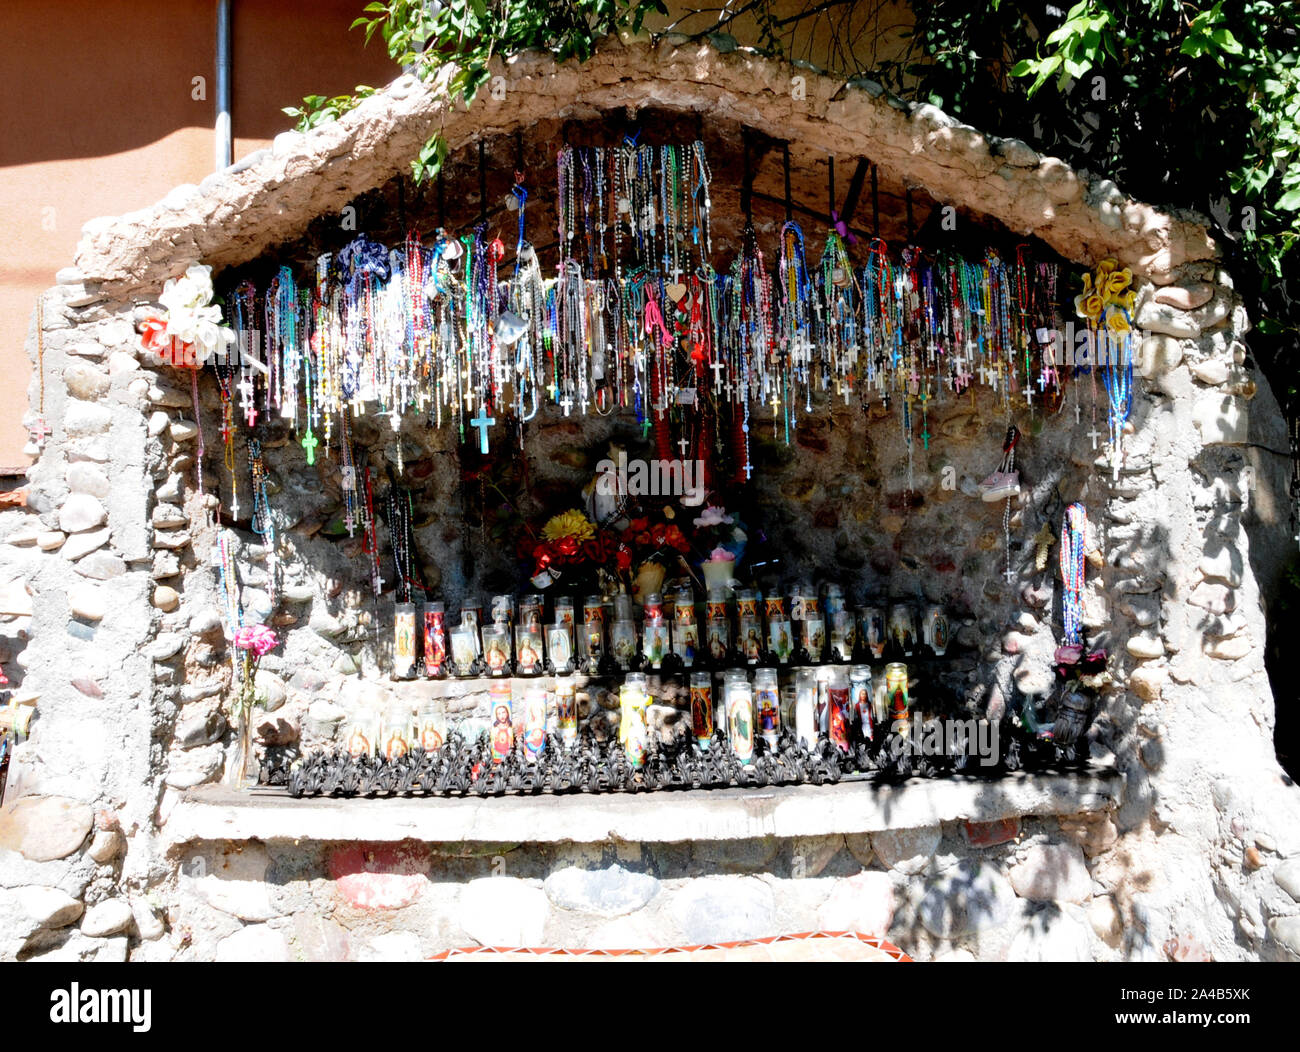 Offerings of crucifixes and candles in a small man made grotto at El Santuario de Chimayo, New Mexico. The church and grounds is an area of pilgrimage Stock Photo